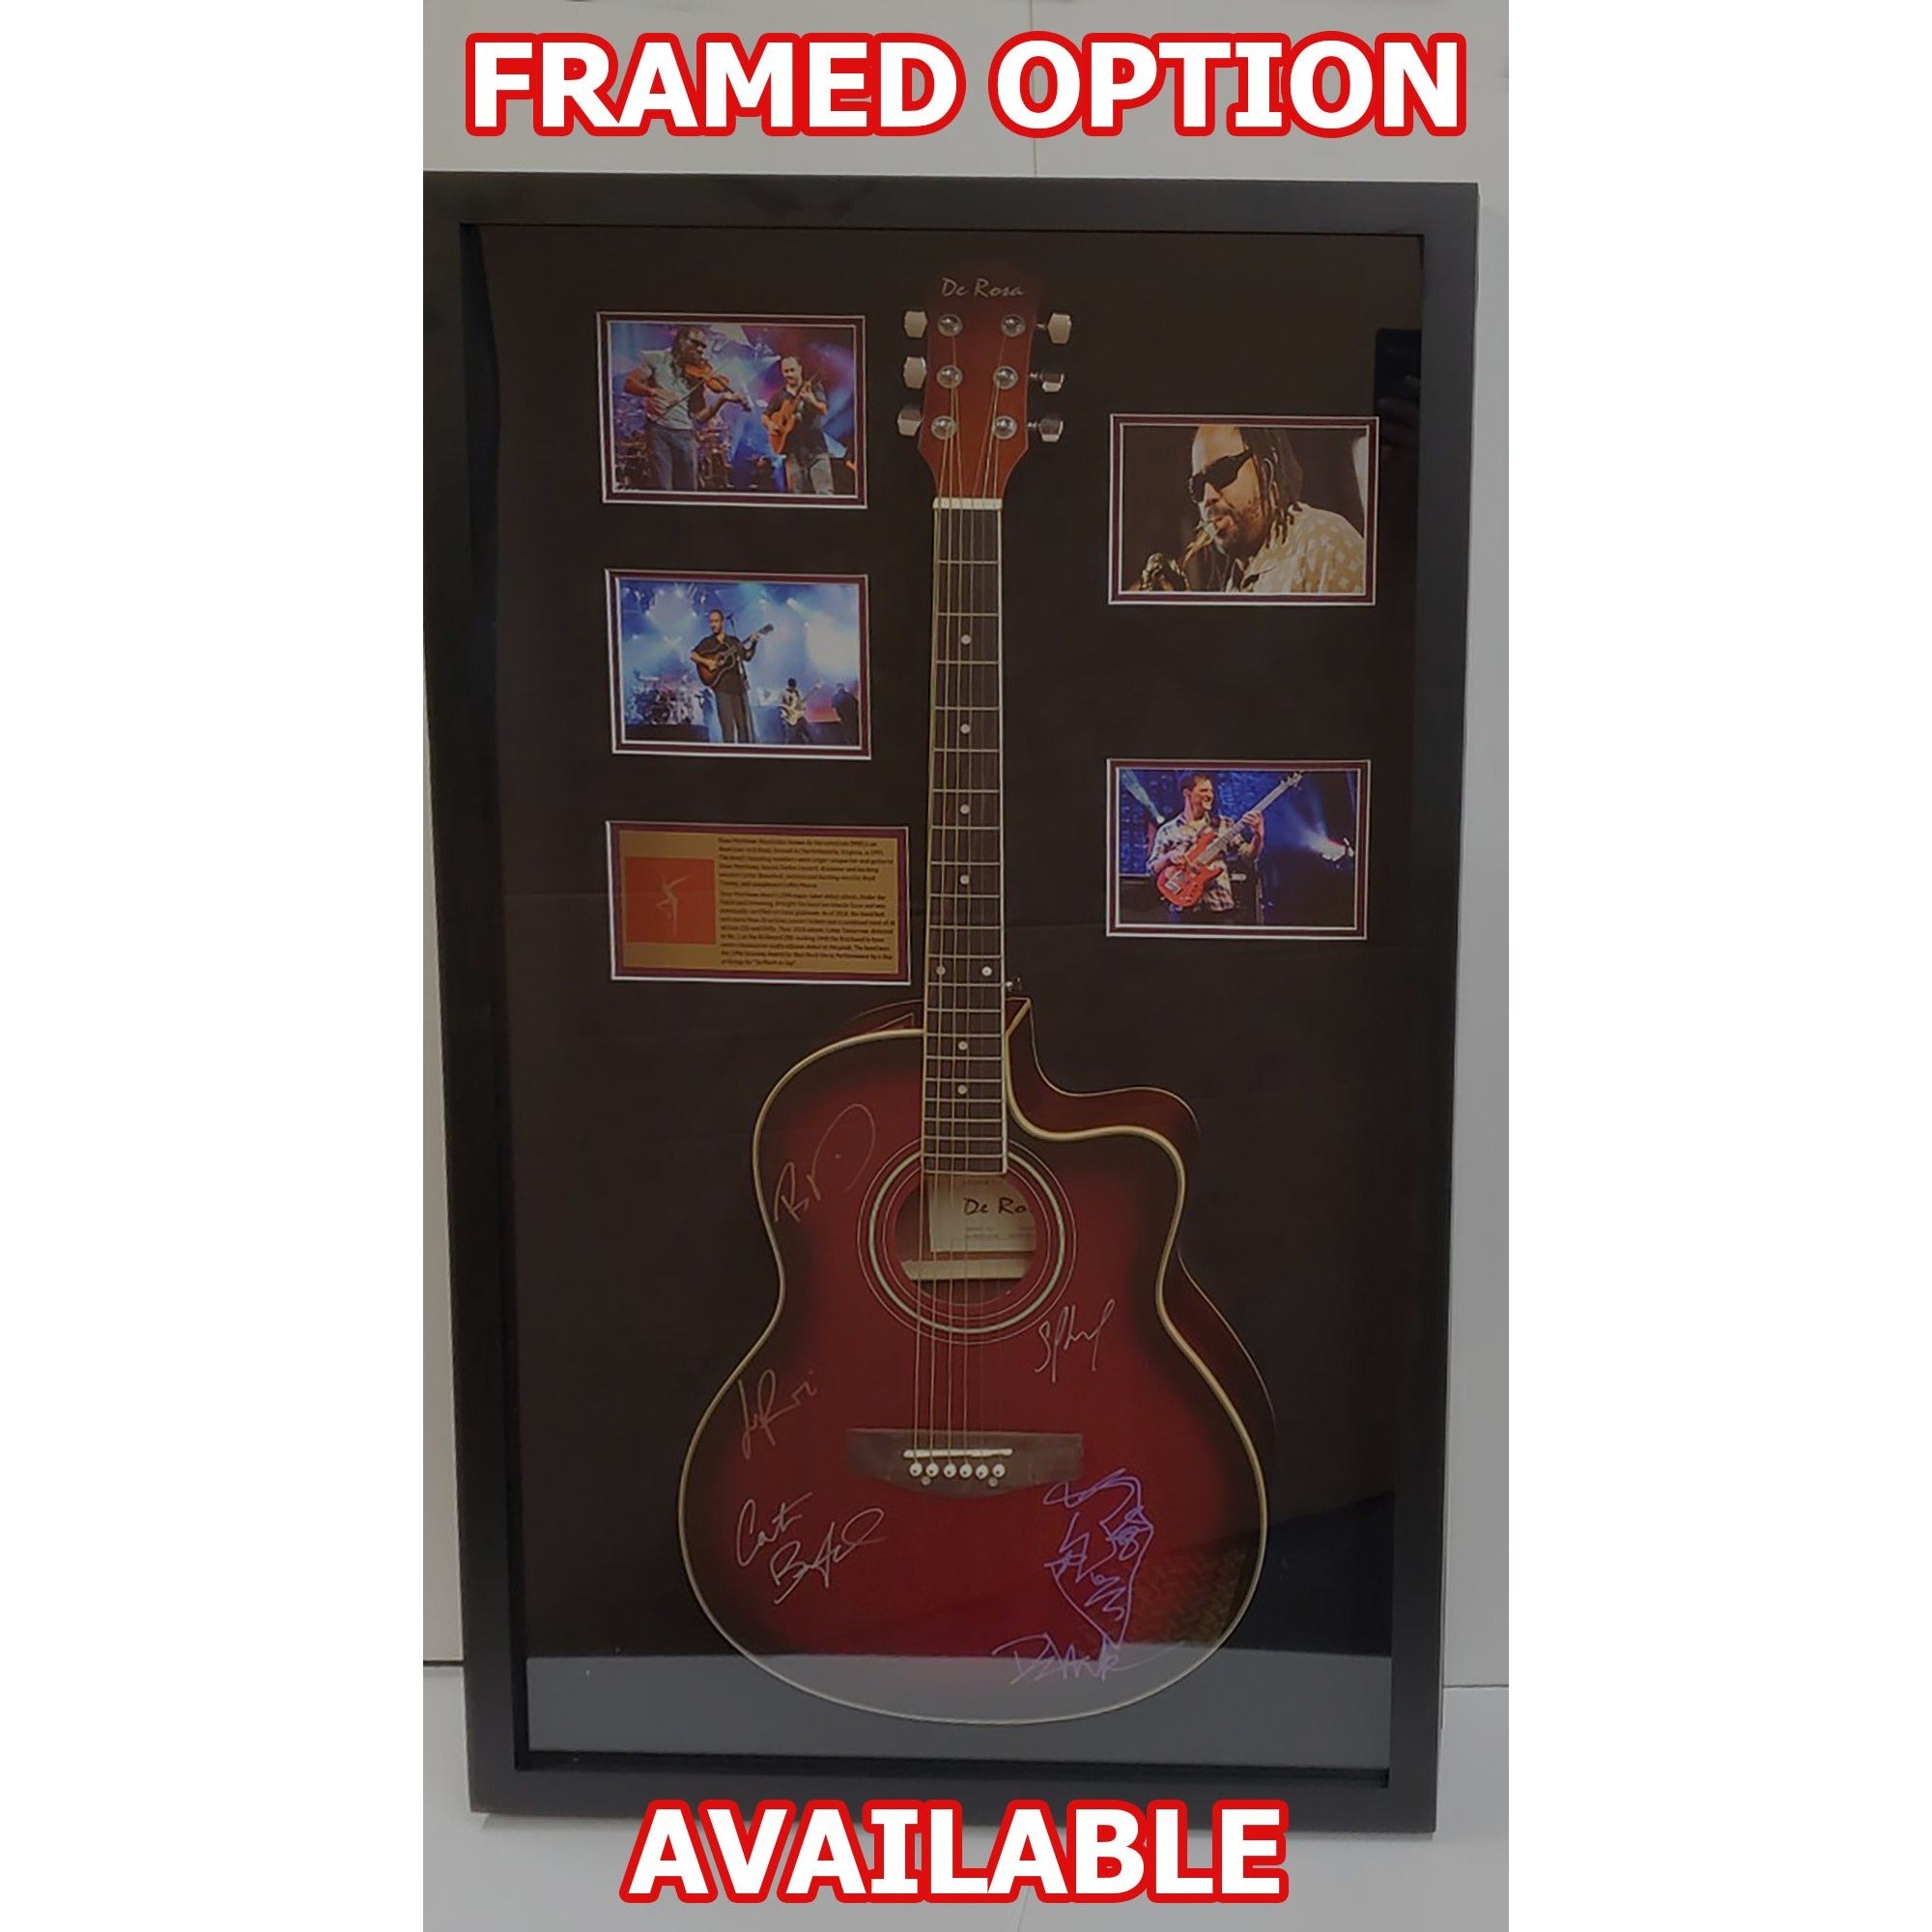 Bruce Springsteen Clarence Clemons Roy Bittan Patty Scialfa and the E Street Band full size acoustic guitar signed with proof 8 sigs.